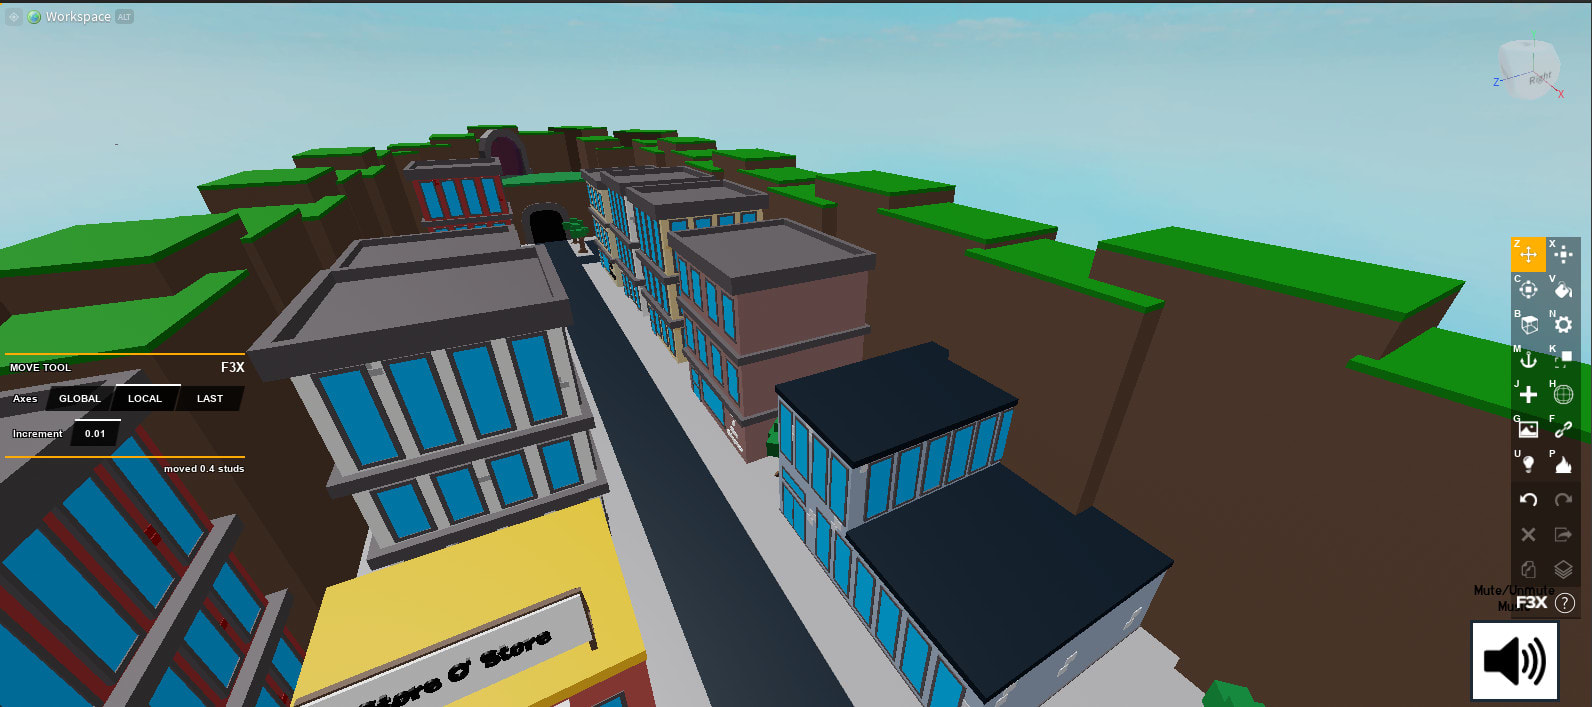 Create Low Poly Objects And Or Map In Roblox Studio By I Chriss